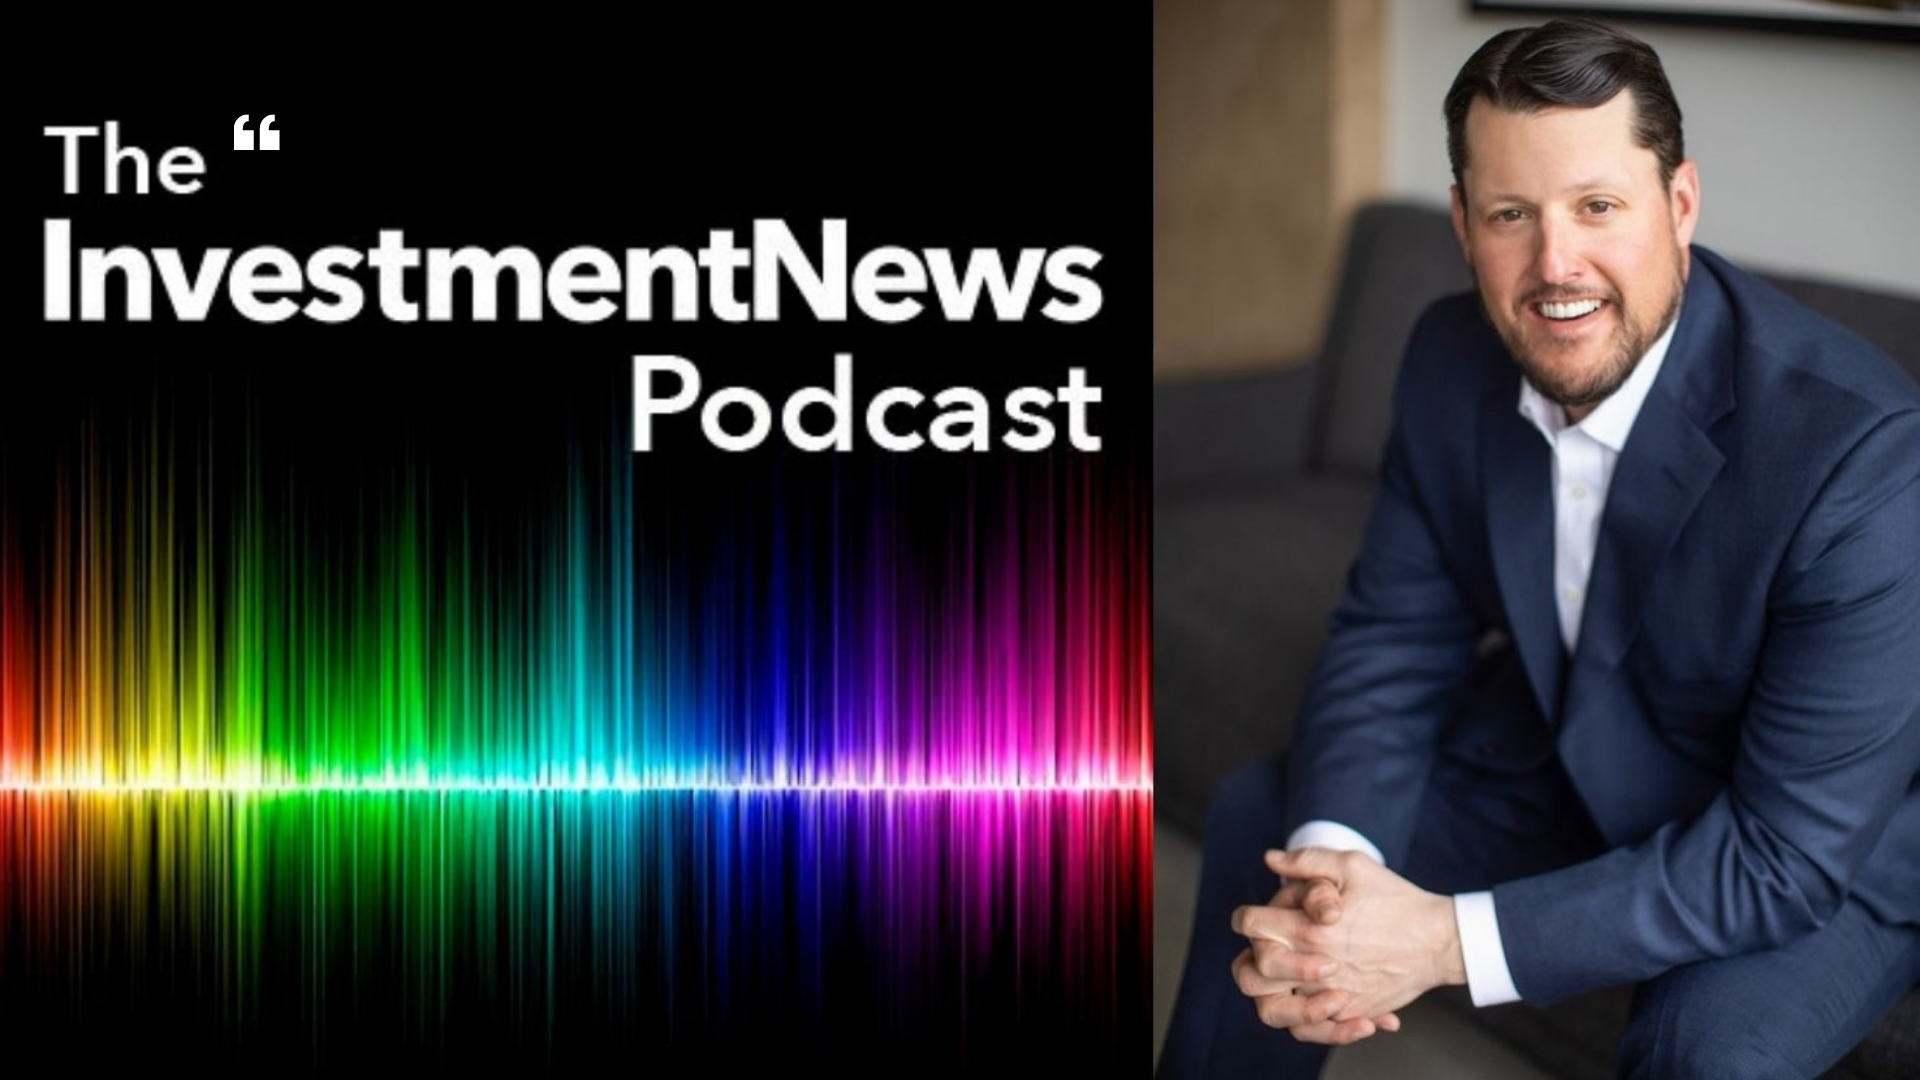 InvestmentNews Podcast features Moneta CEO Eric Kittner in conversation about RIA industry trends